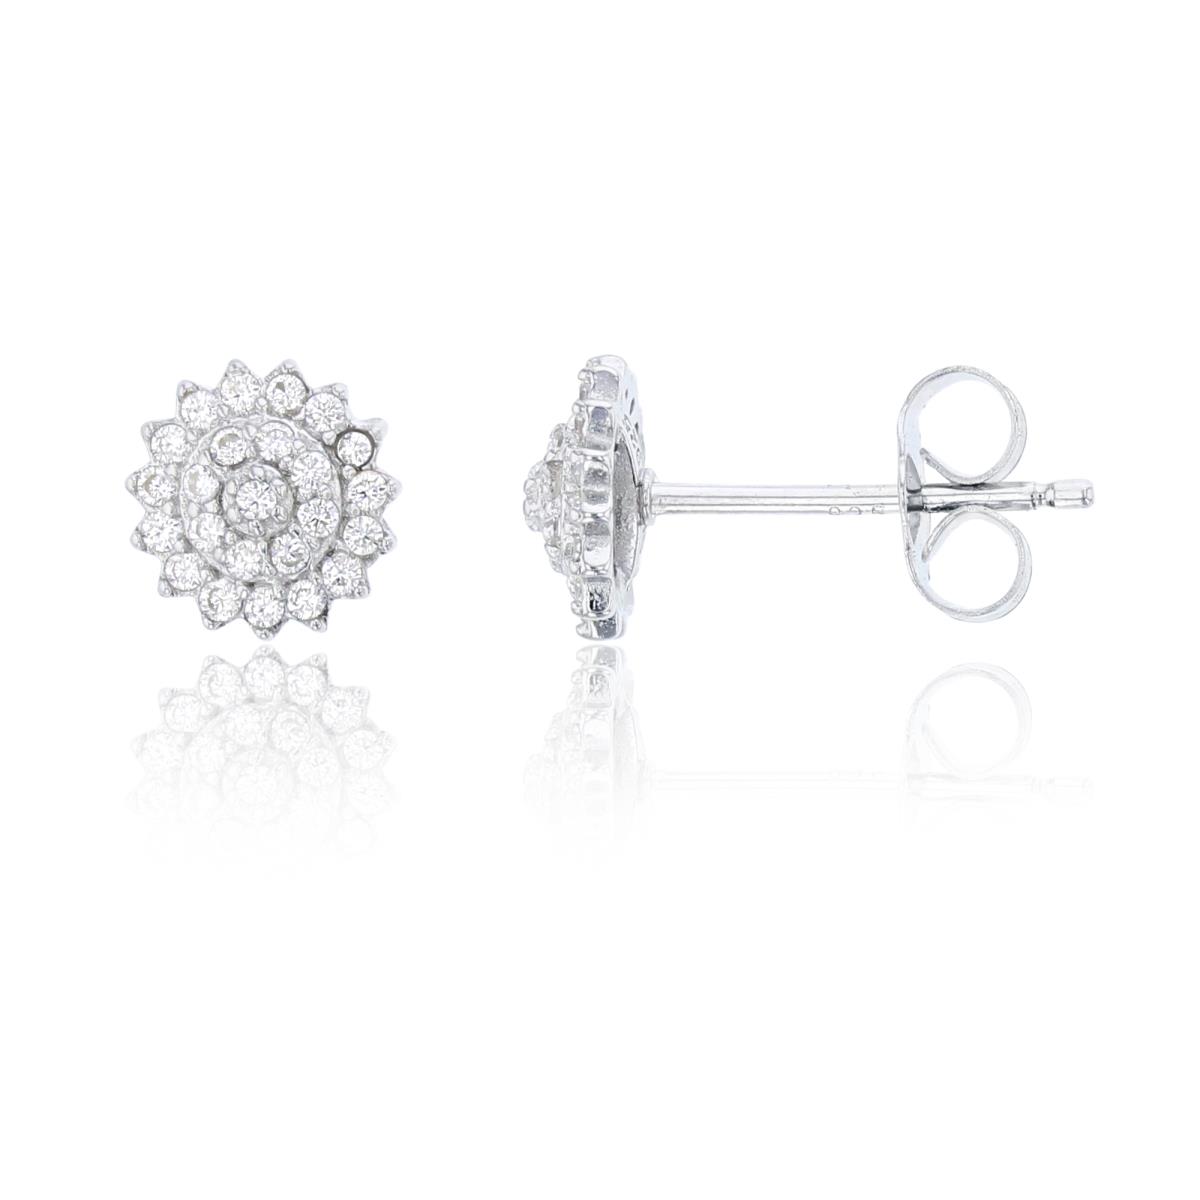 Sterling Silver 8x8mm Pave Cluster Stud Earring